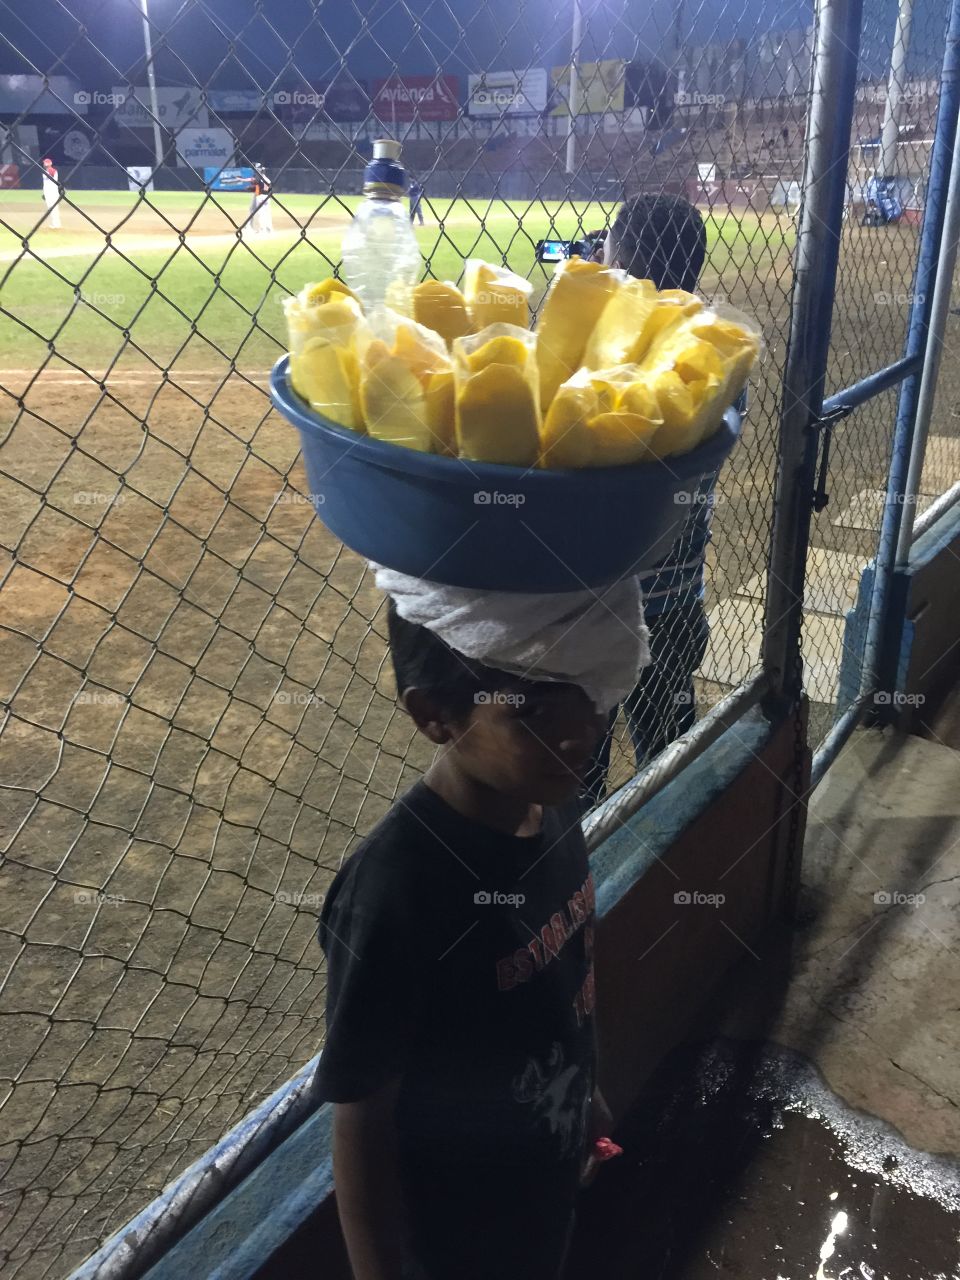 Young boy selling mango slices at baseball game in Managua. 